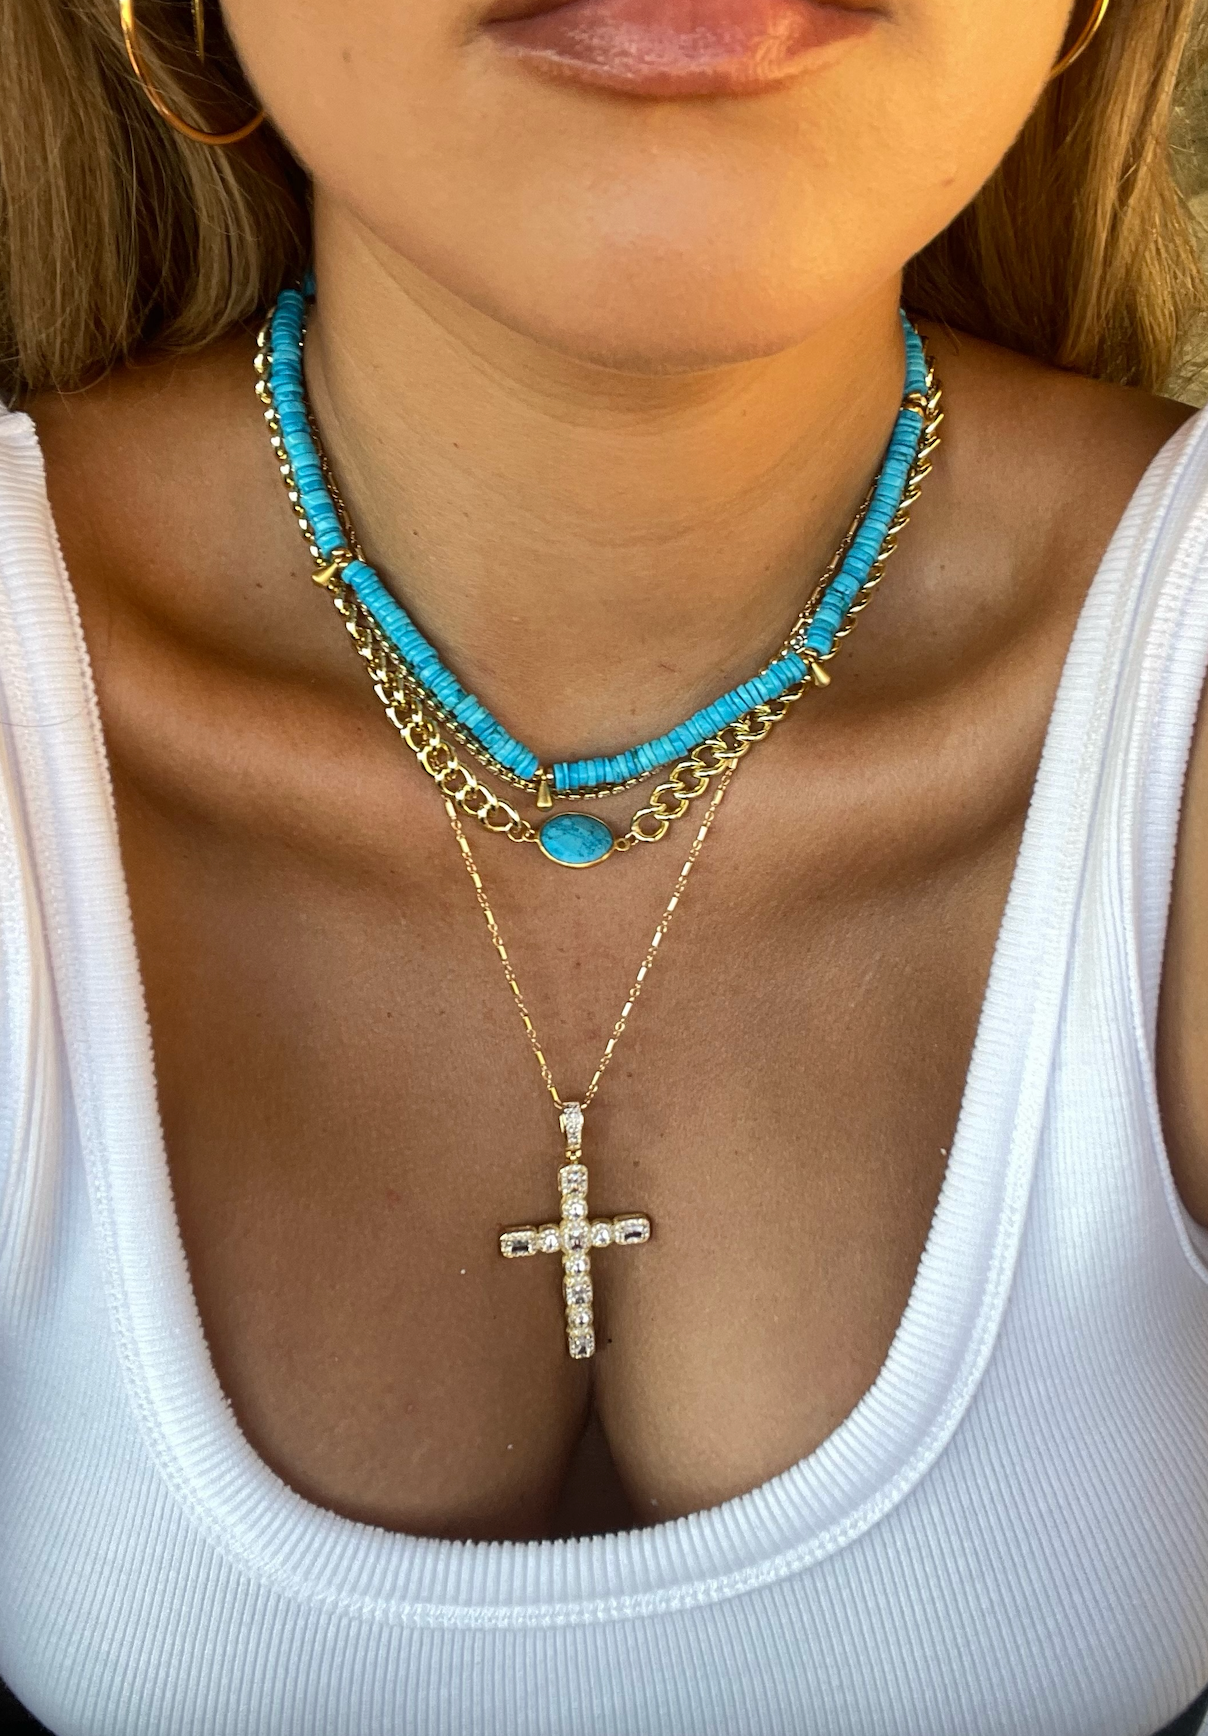 The Turquoise Beaded Necklace